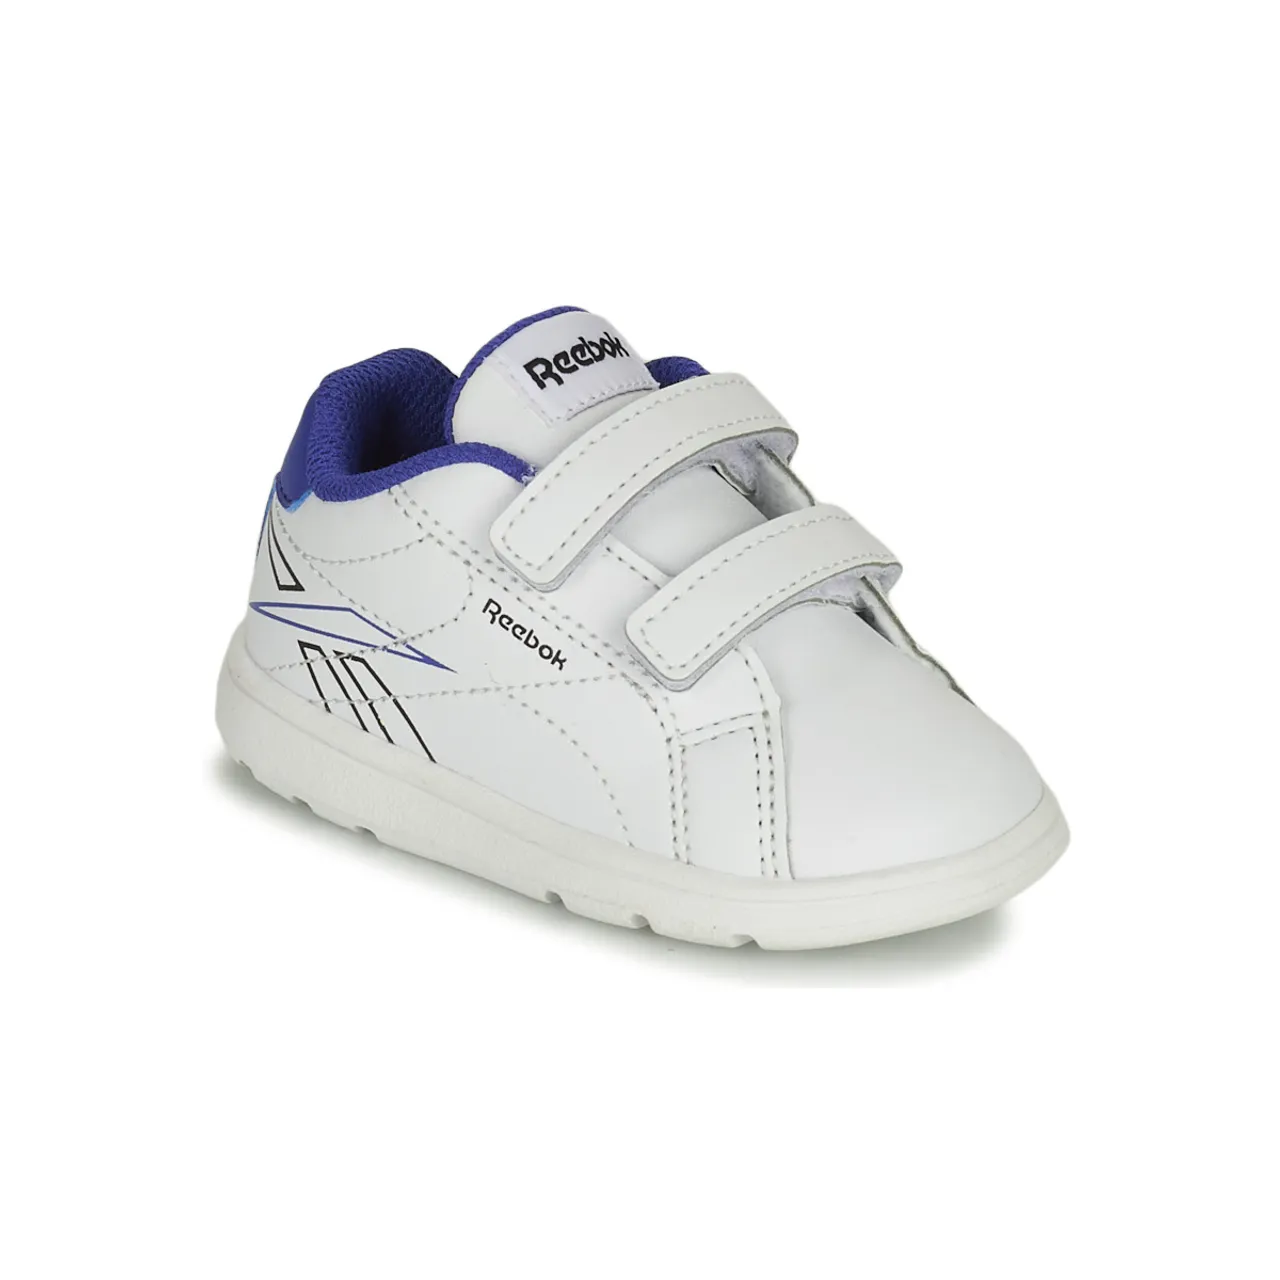 Reebok Classic  RBK ROYAL COMPLETE  boys's Children's Shoes (Trainers) in White